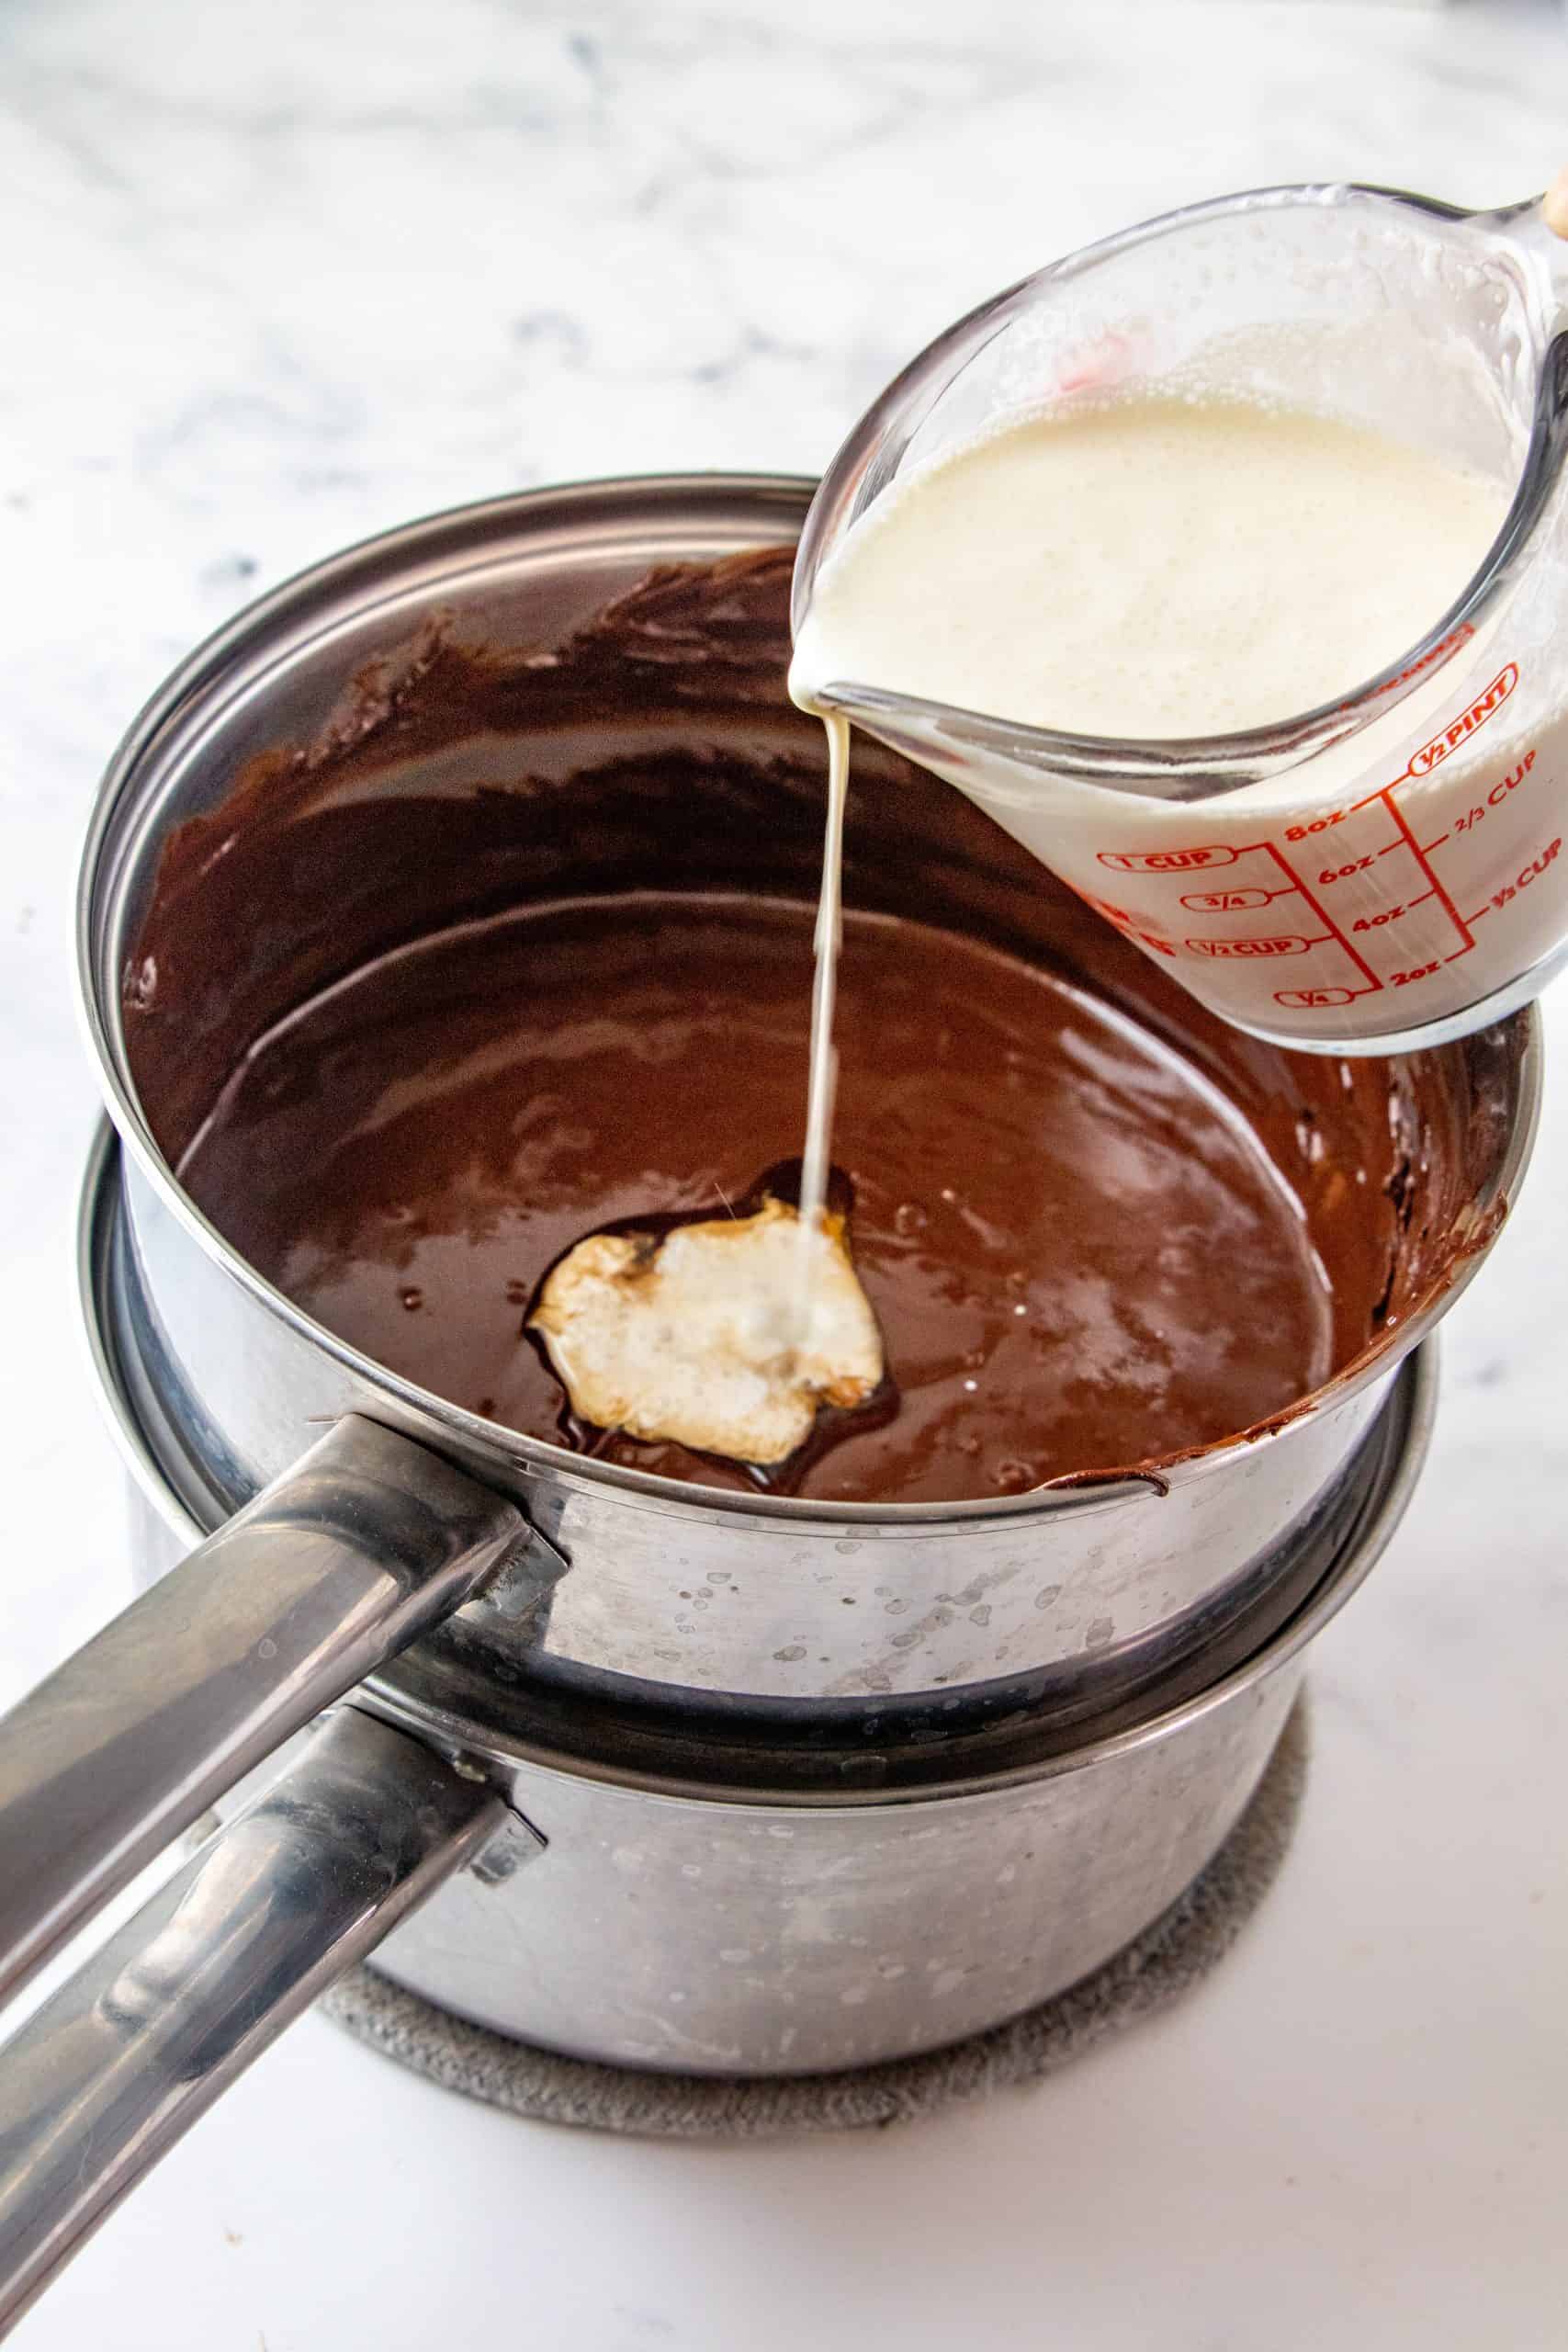 Heavy cream being poured into chocolate sauce in a pan.